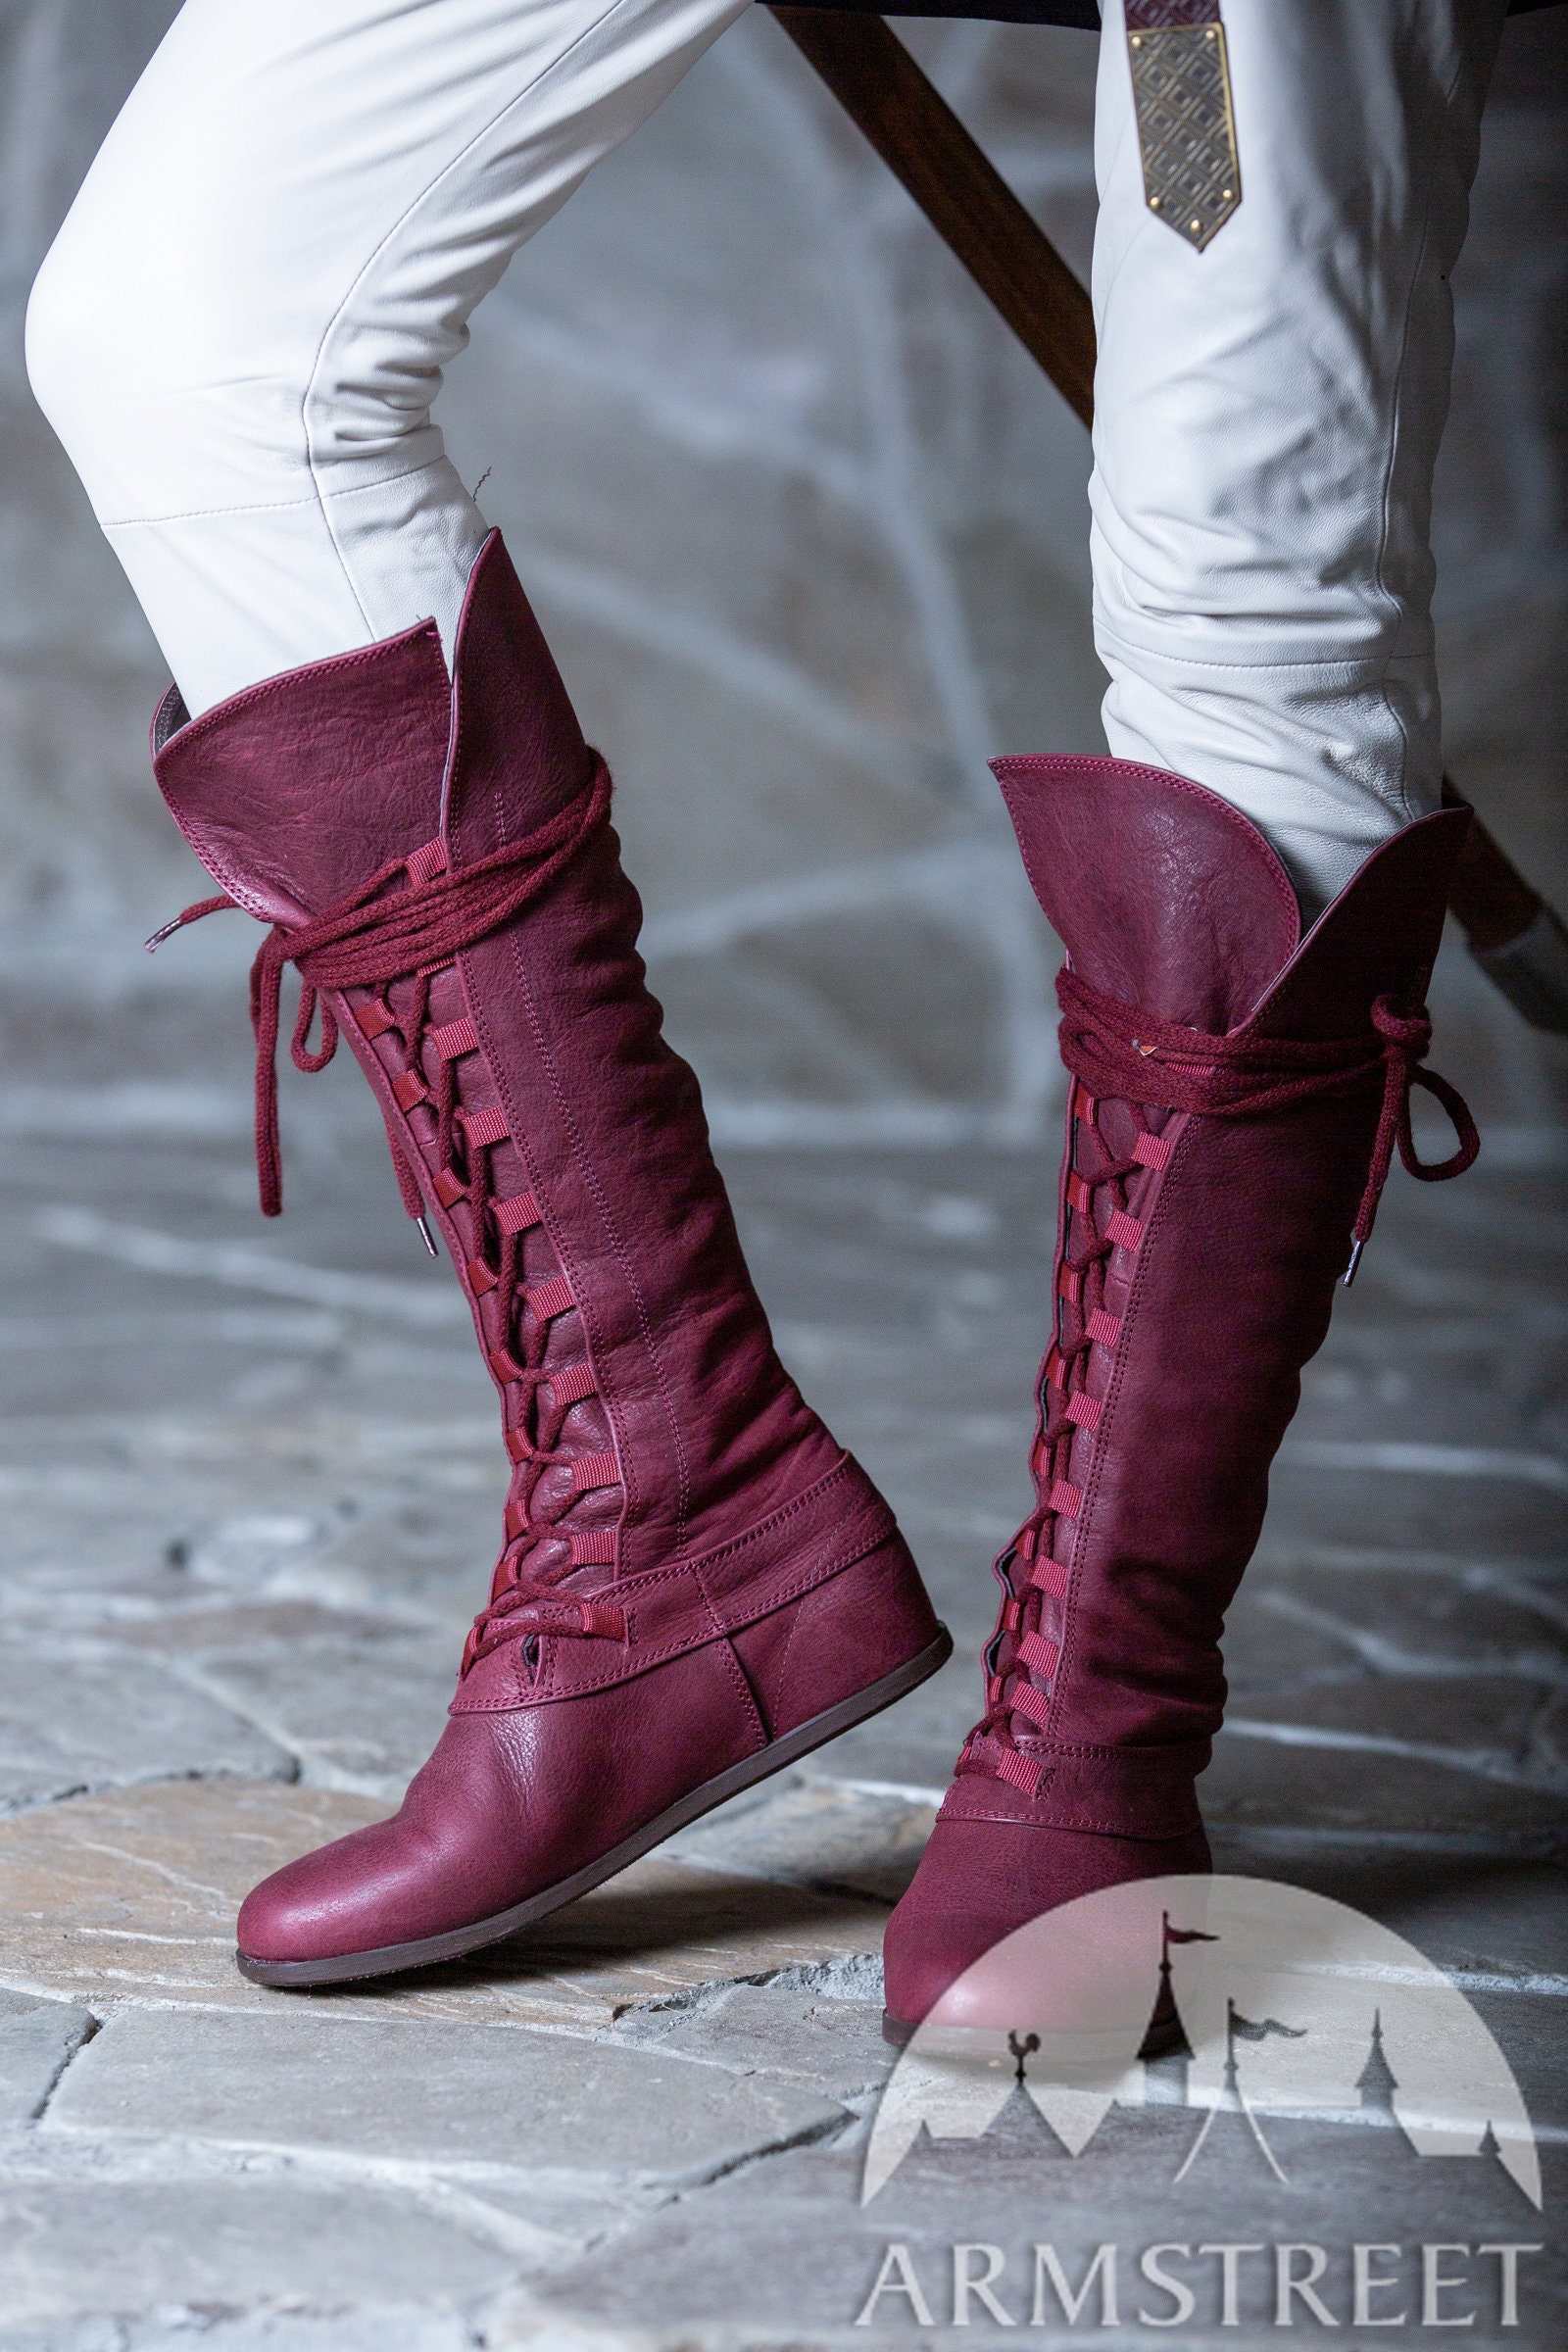 Knee-high medieval leather boots “Dark Wolf” for sale. Available in:  burgundy matte leather, matte black leather :: by medieval store ArmStreet